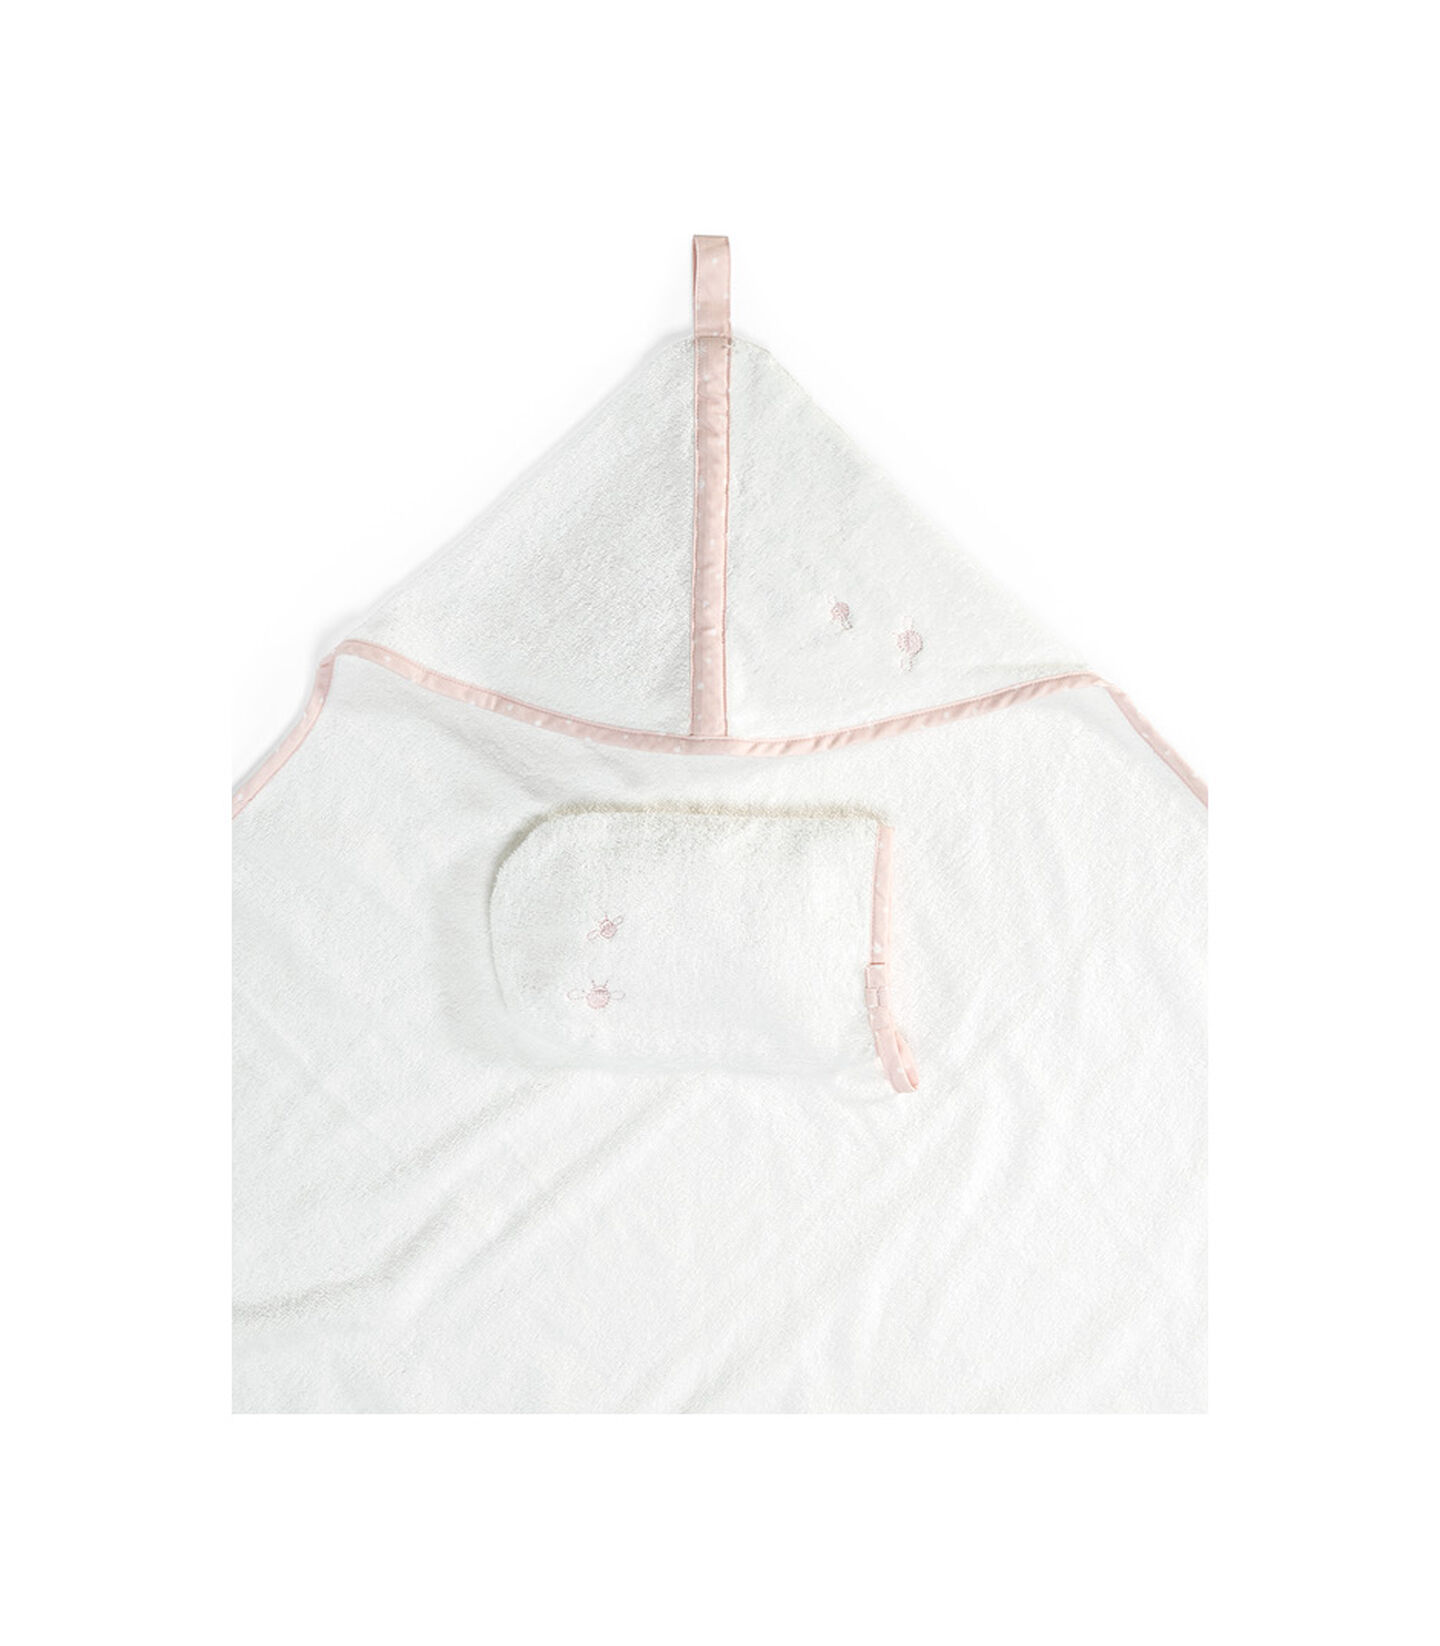 Stokke® Hooded Towel Pink Bee, Розовые пчелки, mainview view 1